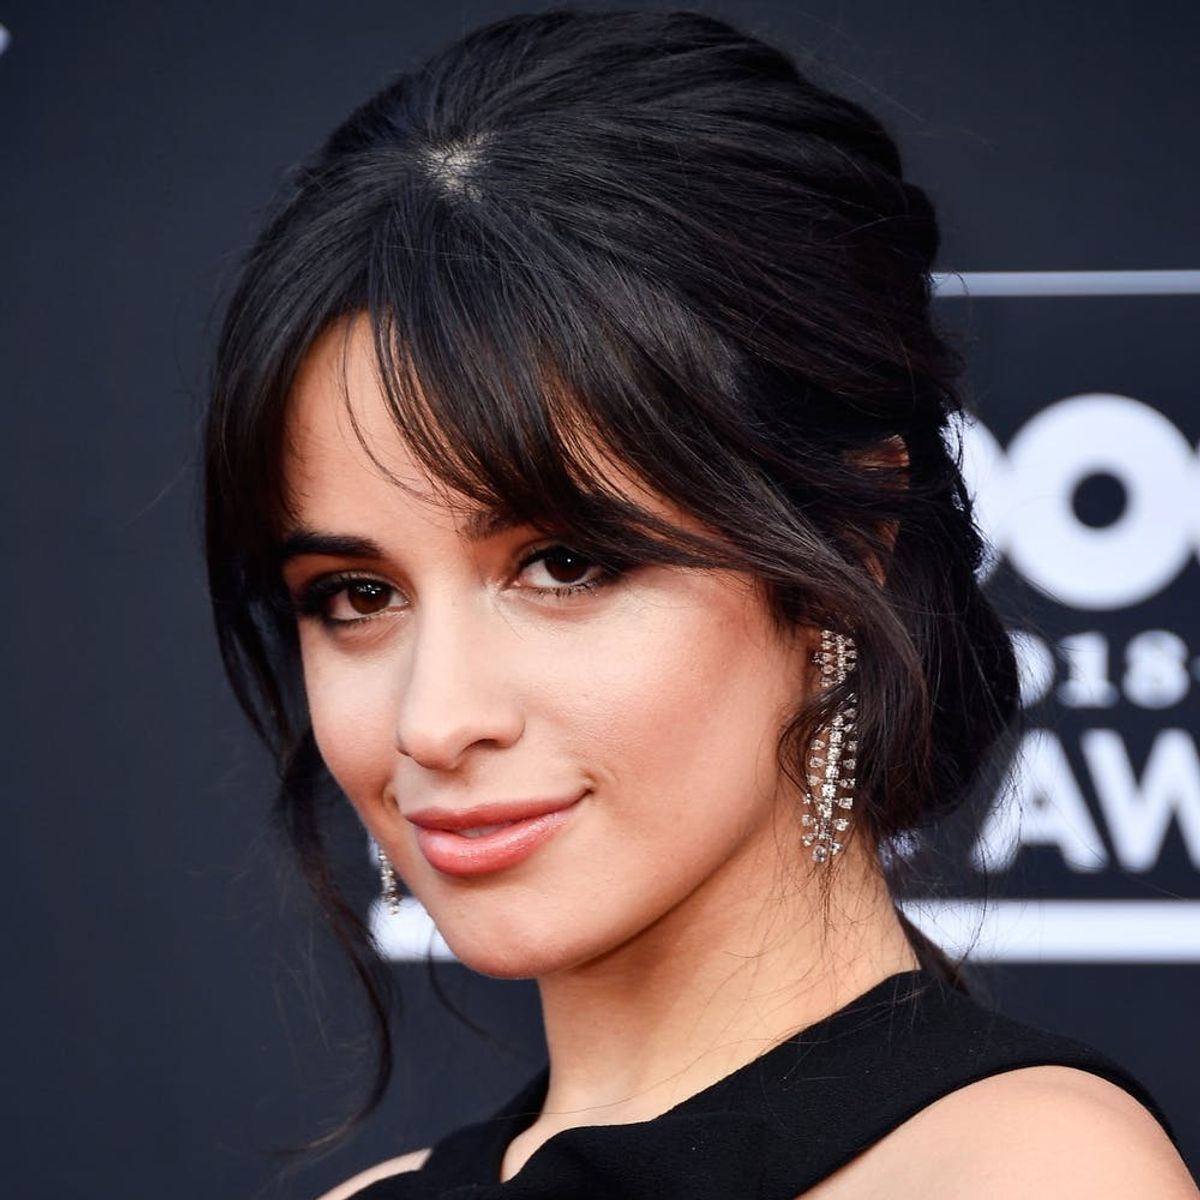 Camila Cabello Opening Up About OCD Is a Big Deal — Here’s Why